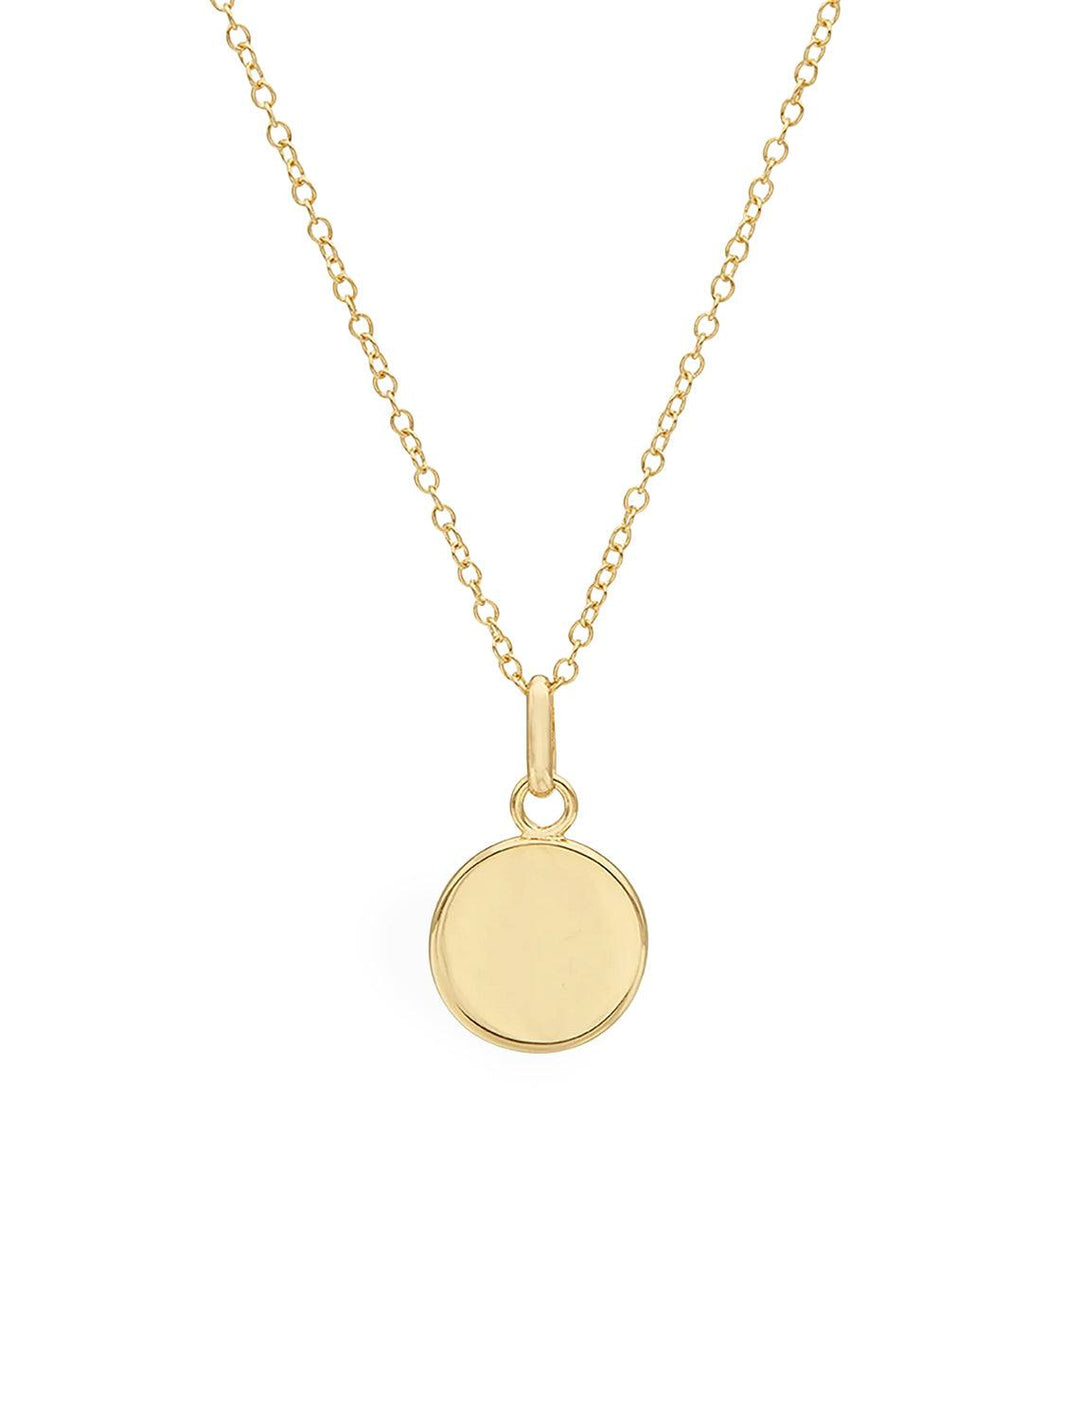 Back view of Anna Beck's Classic Medium Smooth Rim Circle Necklace in Gold.